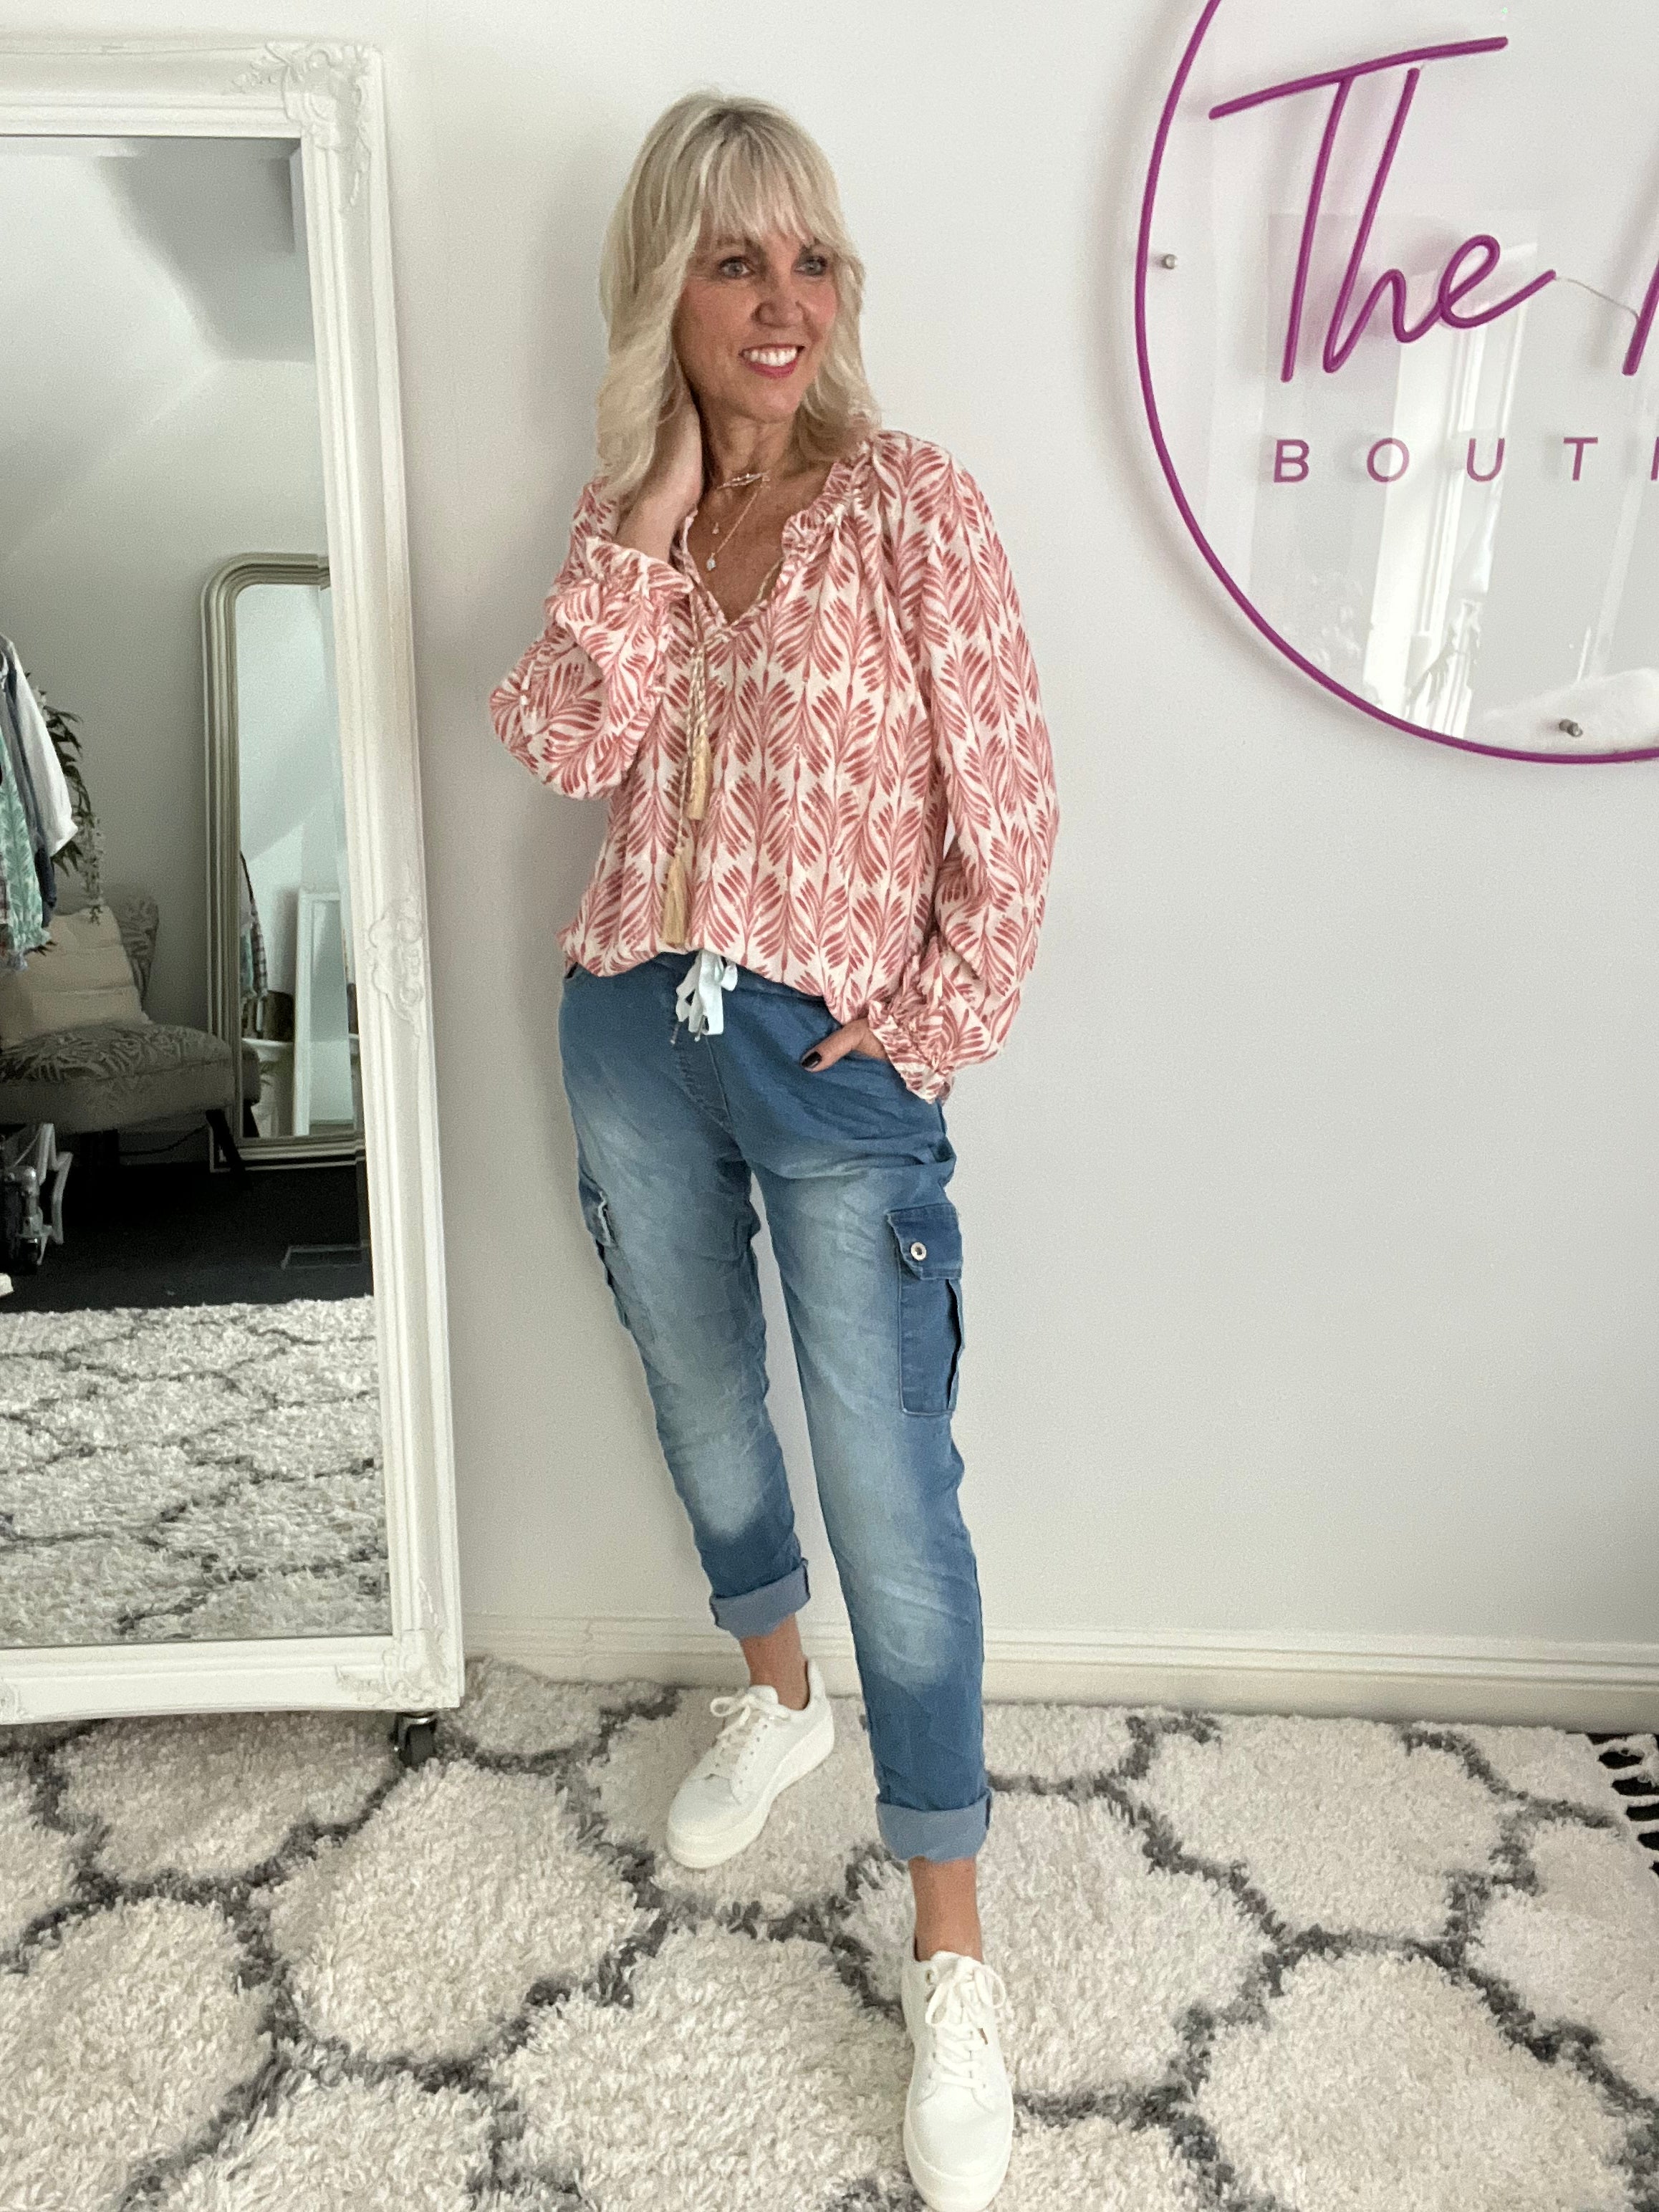 Embroidered Patterned Blouse in Pink